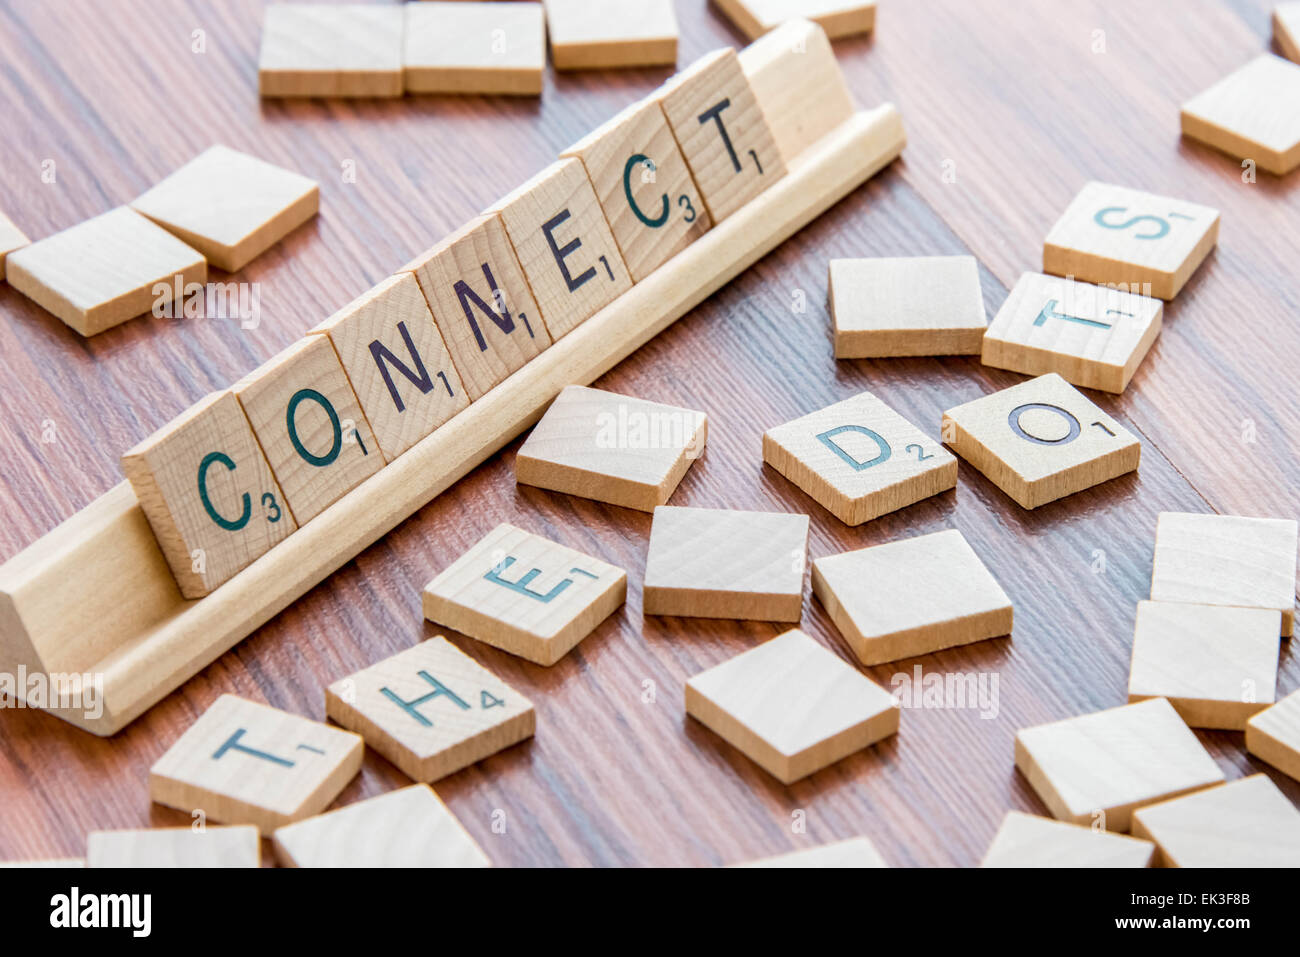 April 4, 2015:  Houston, TX, USA - Scrabble Word Game wood tiles spelling Connect The Dots Stock Photo